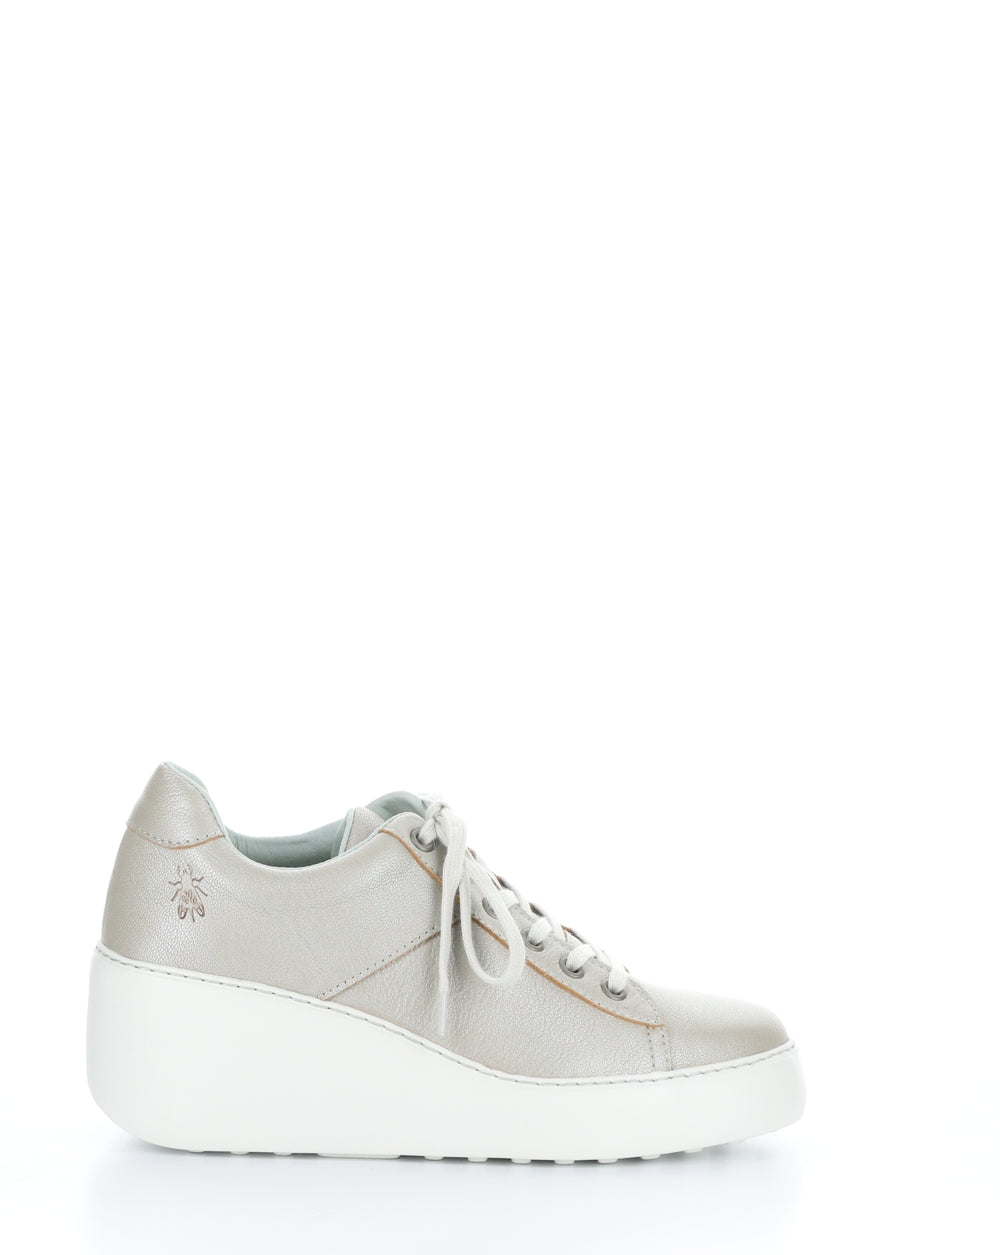 DELF580FLY 004 SILVER Lace-up Shoes